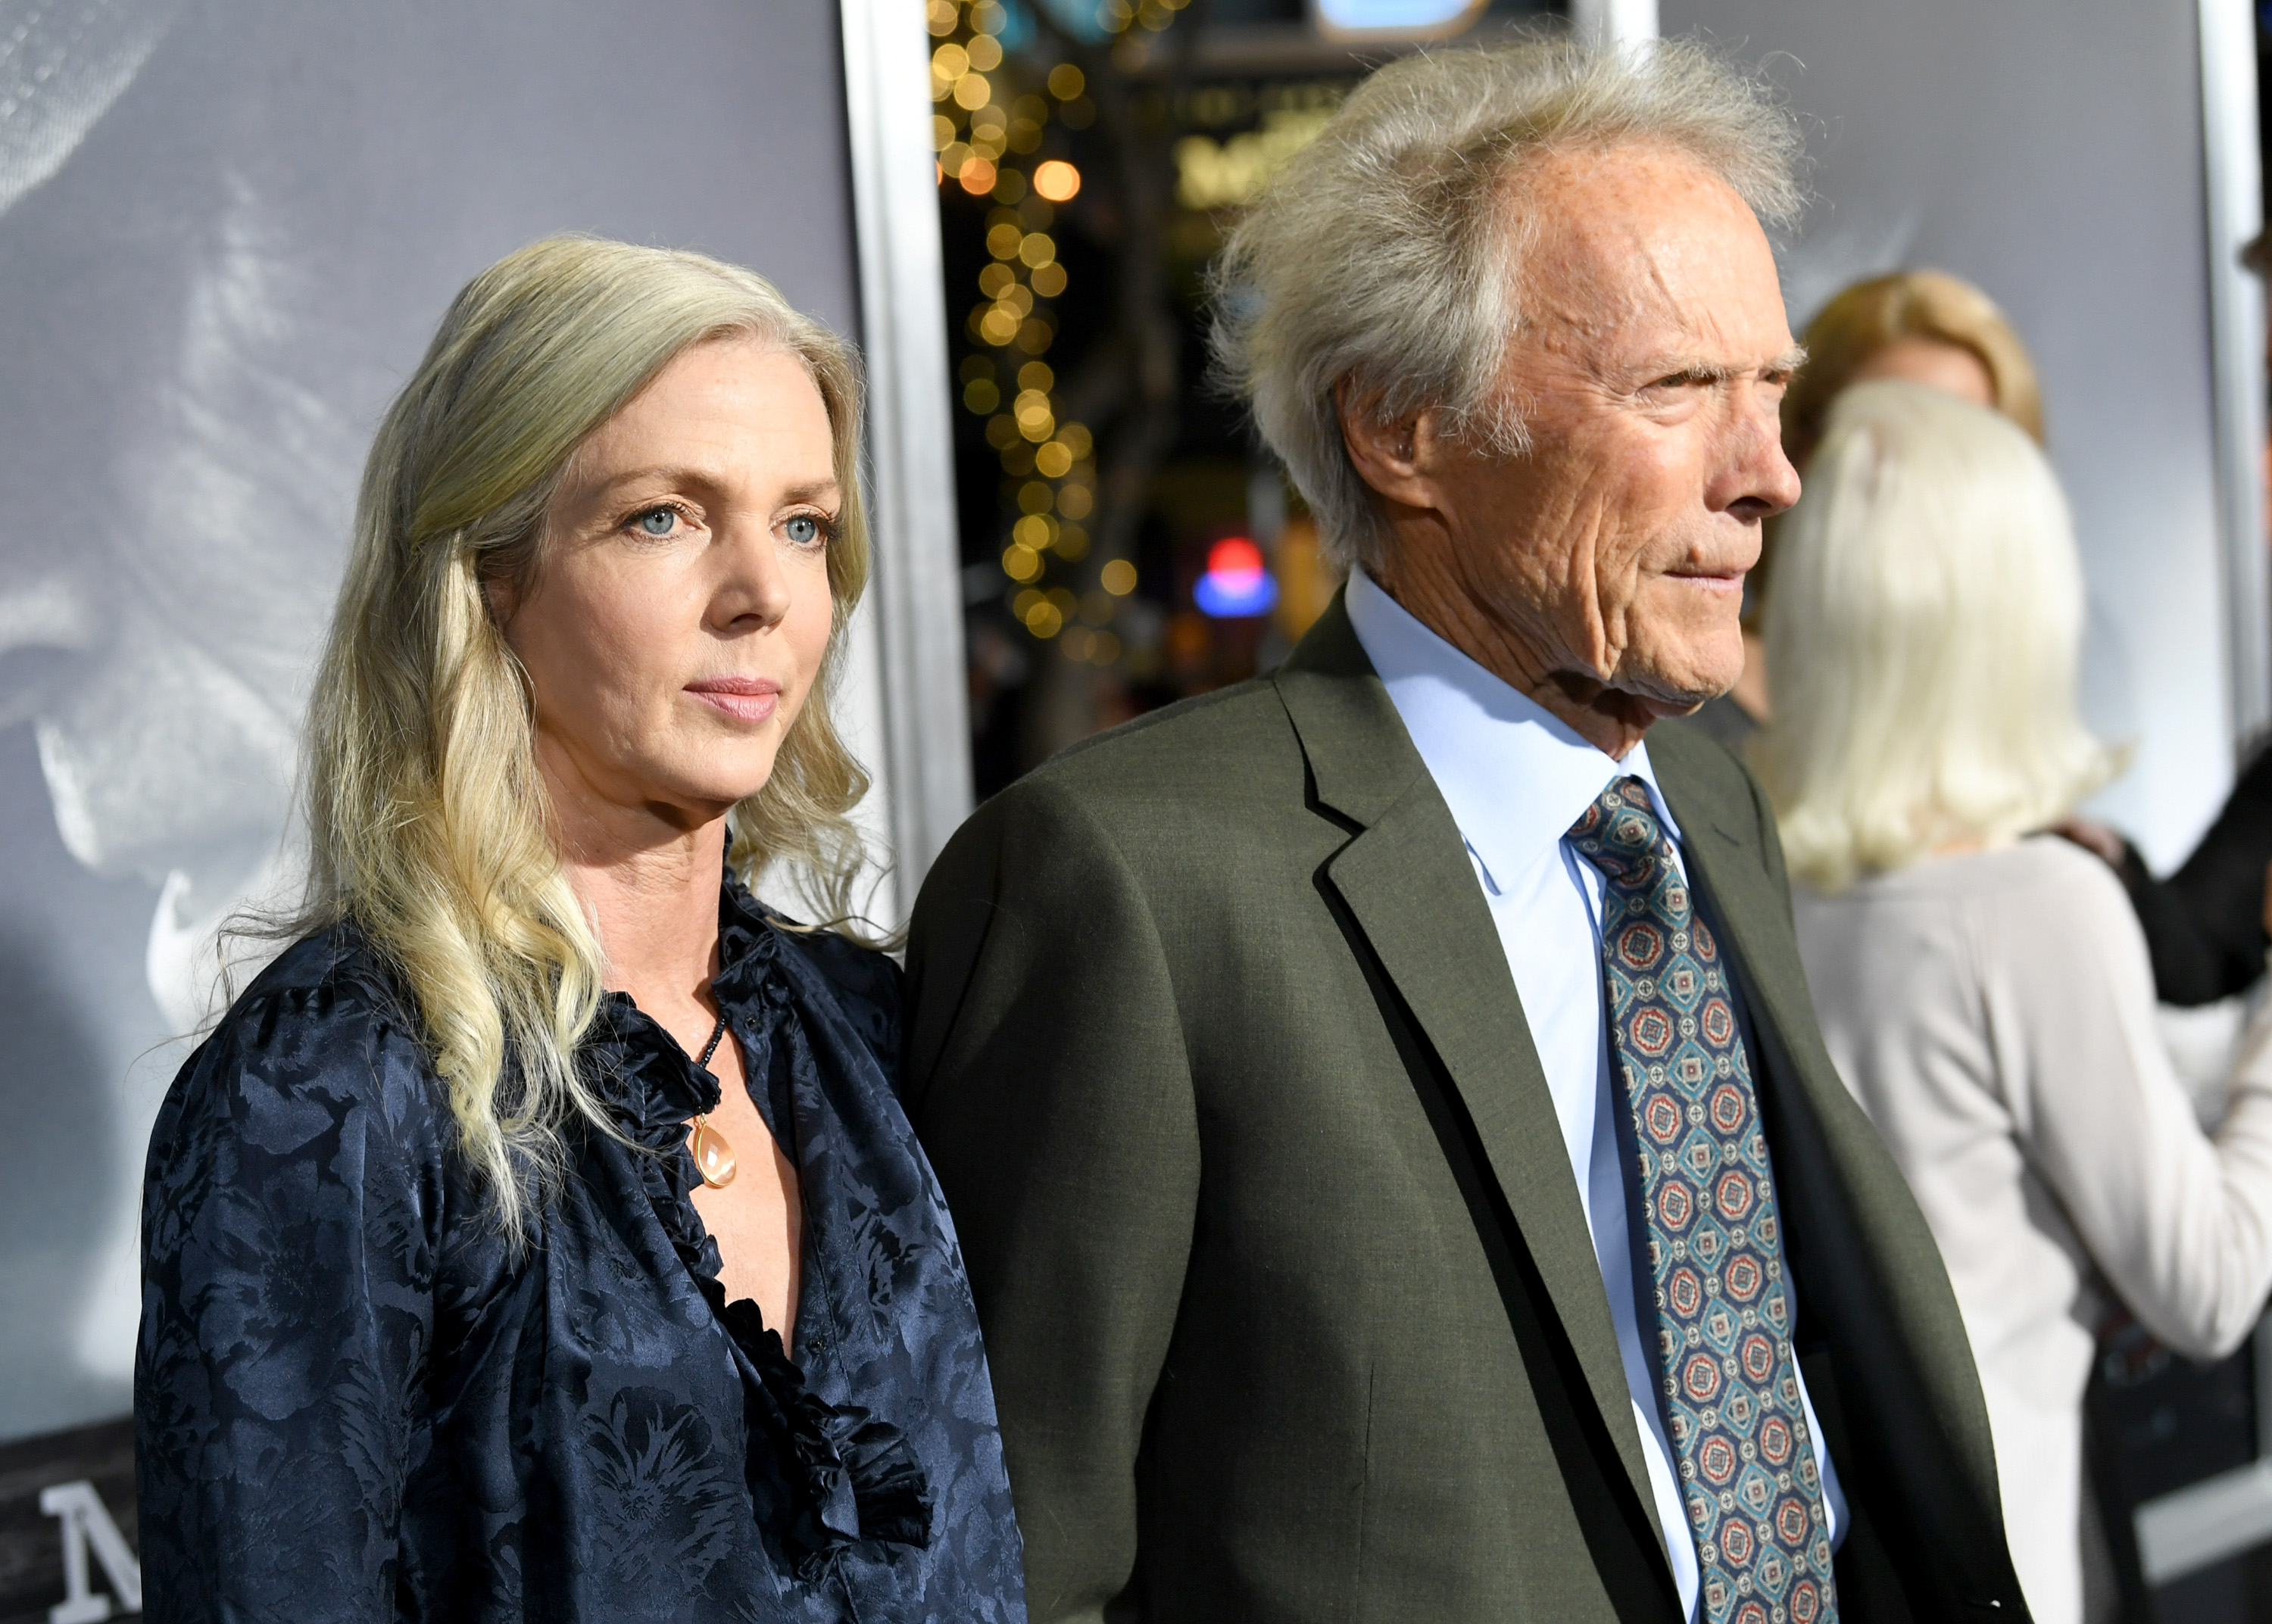 Christina Sandera and Clint Eastwood in Los Angeles, California on December 10, 2018 | Source: Getty Images